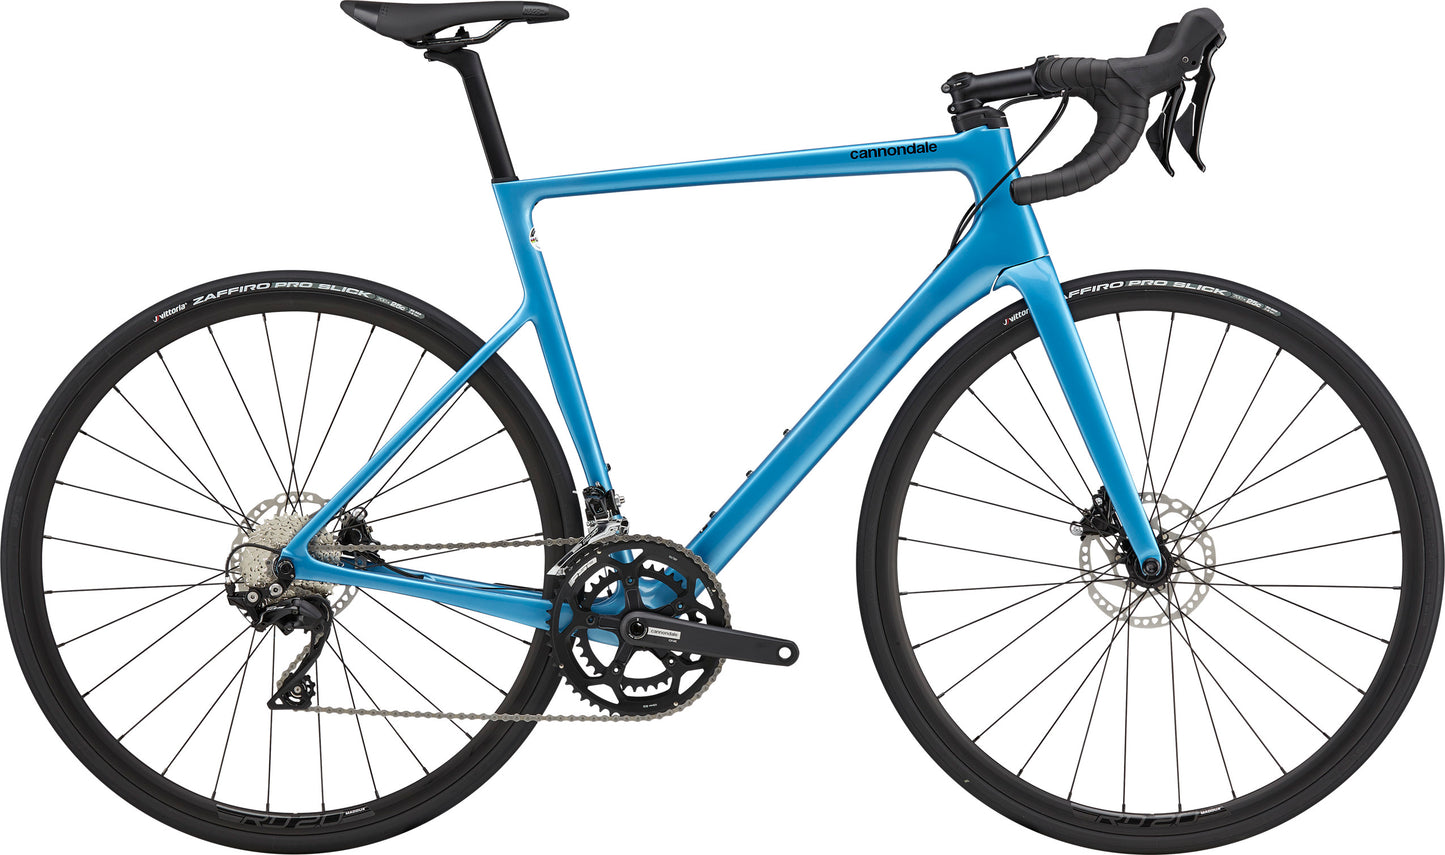 2021 Cannondale 700 M S6 EVO Crb Disc 105